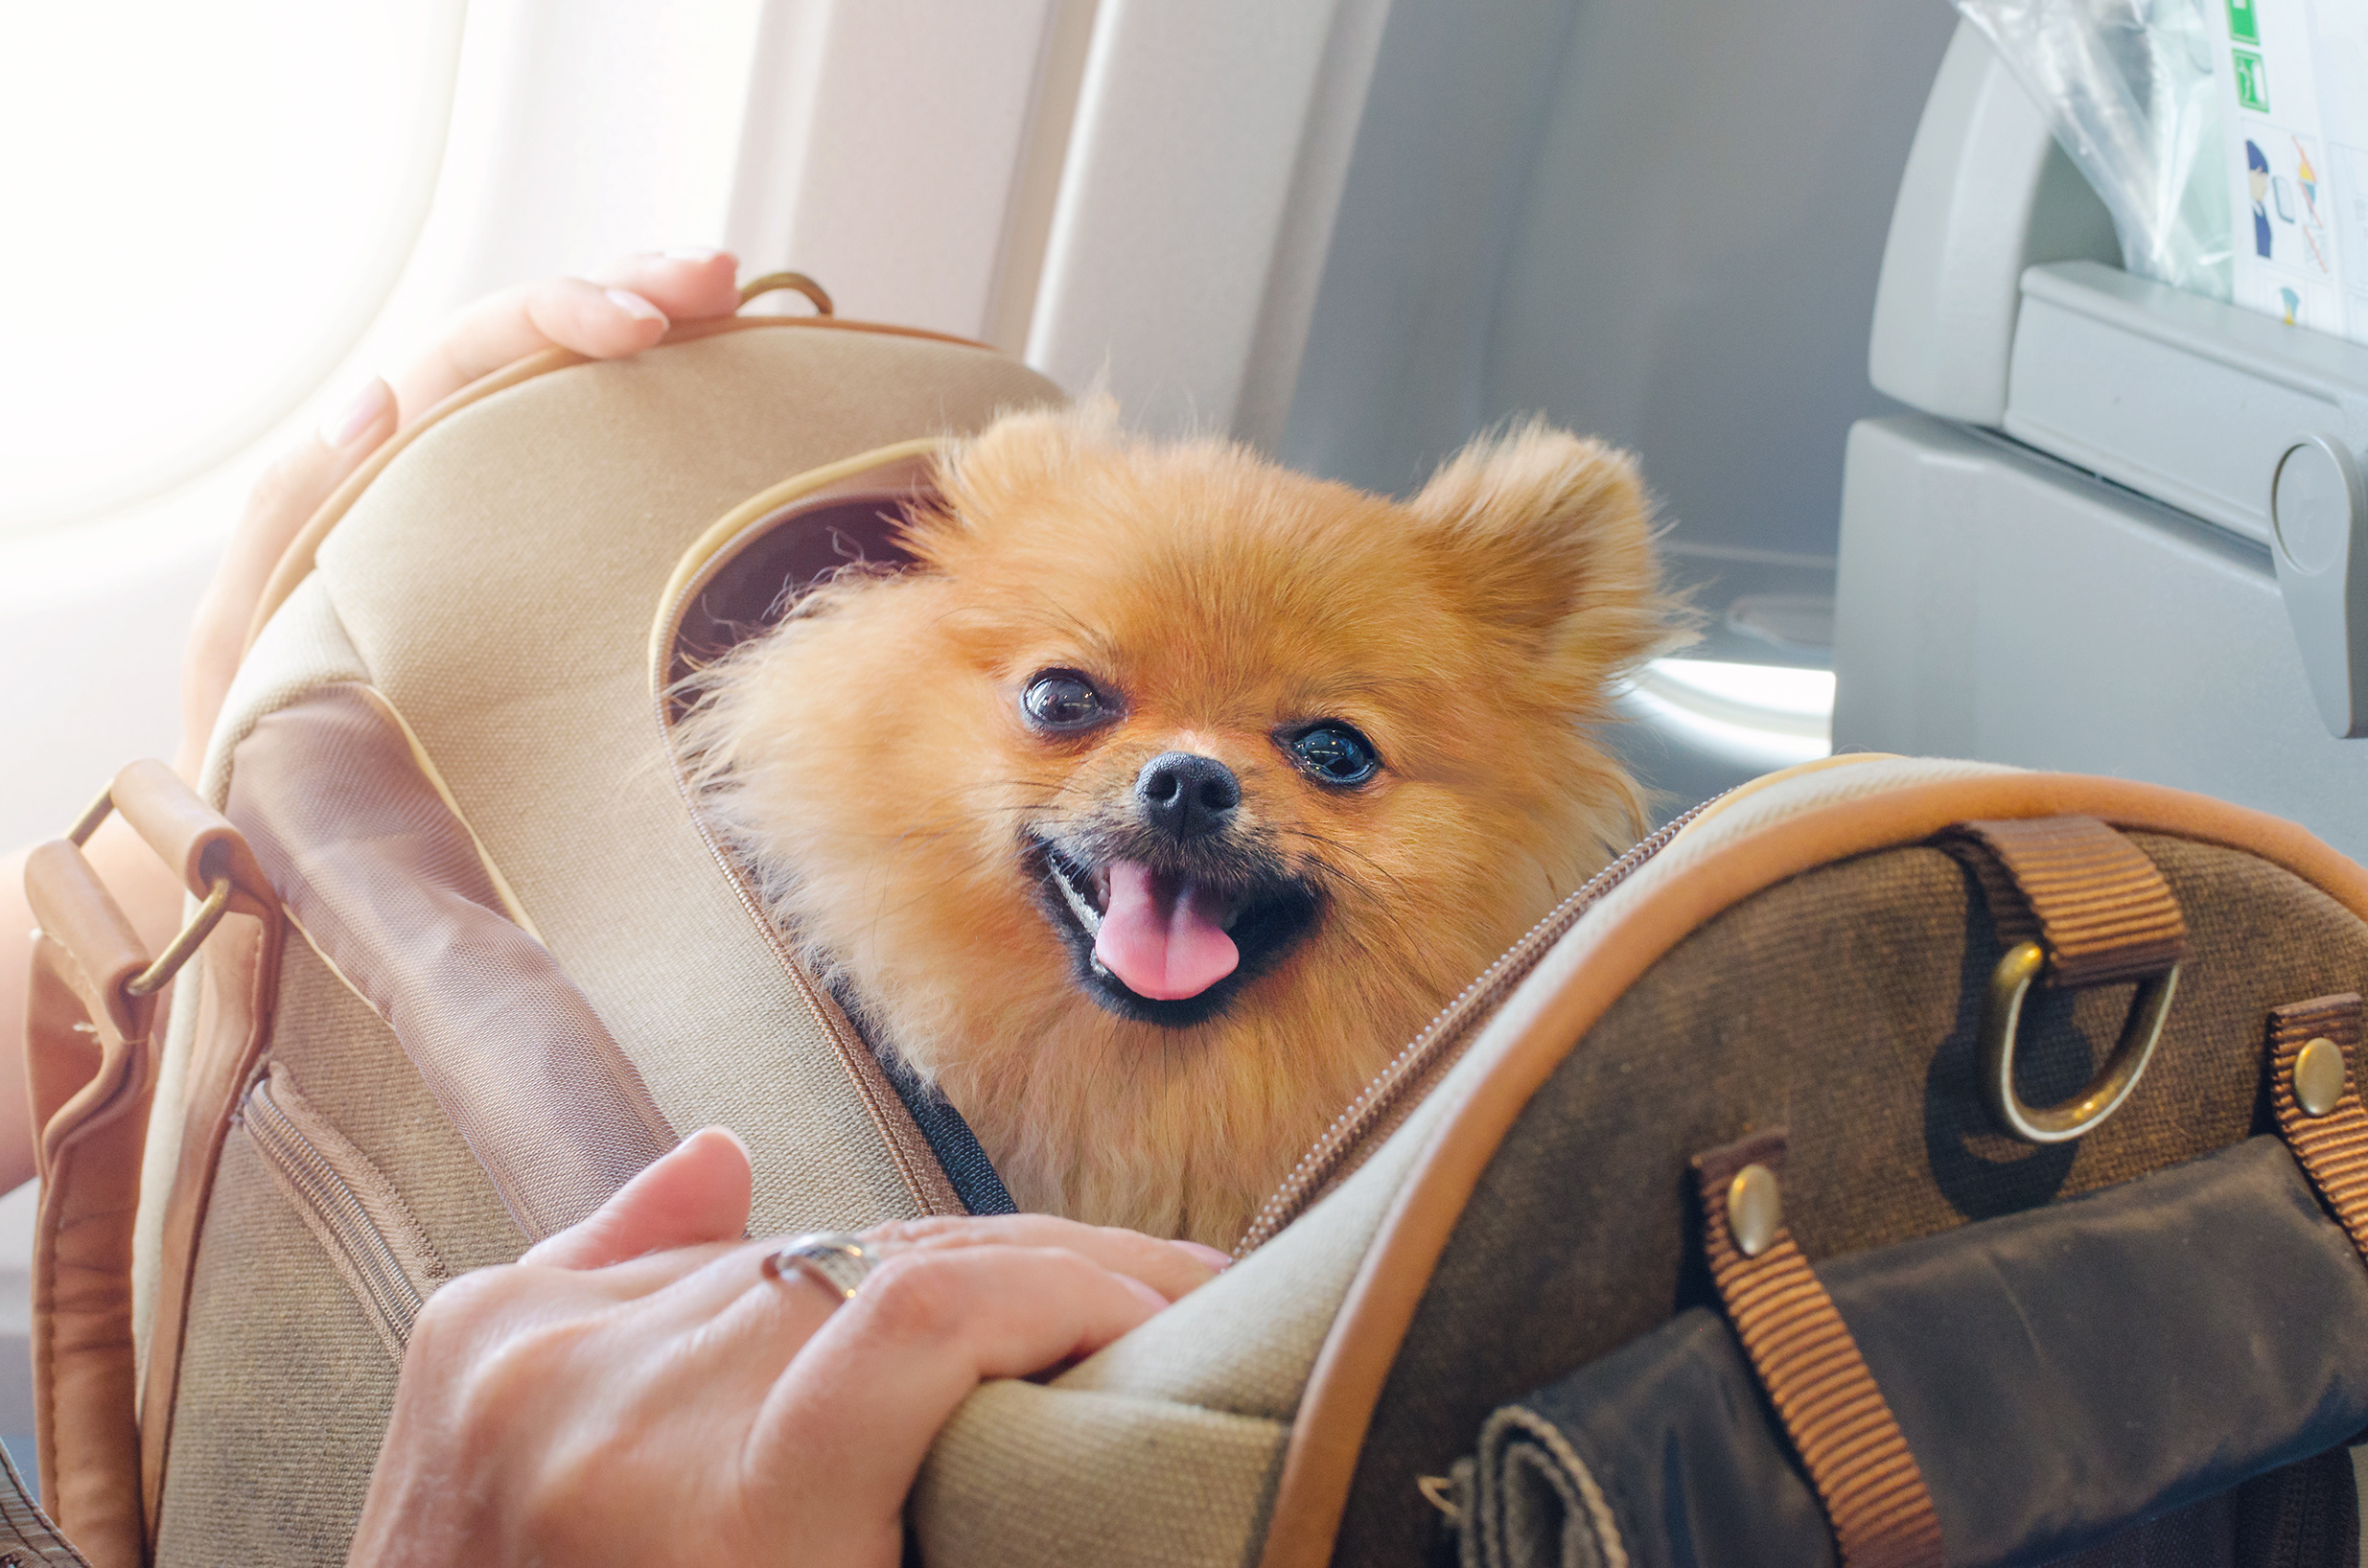 small dog pomaranian spitz in a travel bag on board of plane